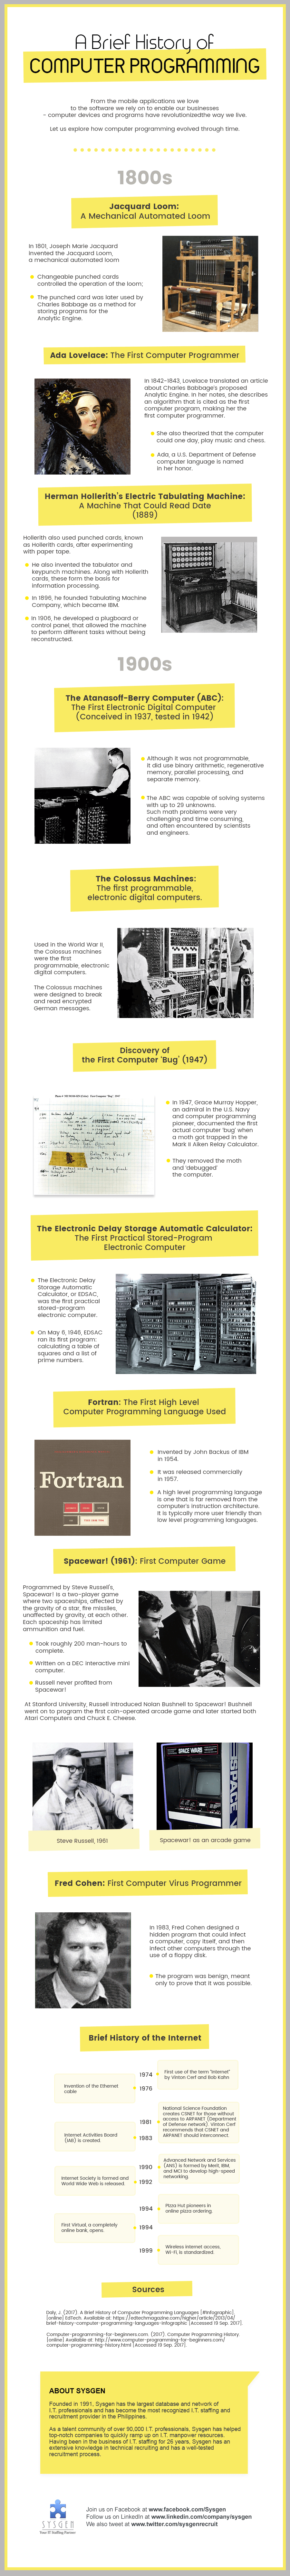 Brief History of Computer Programming in Pictures